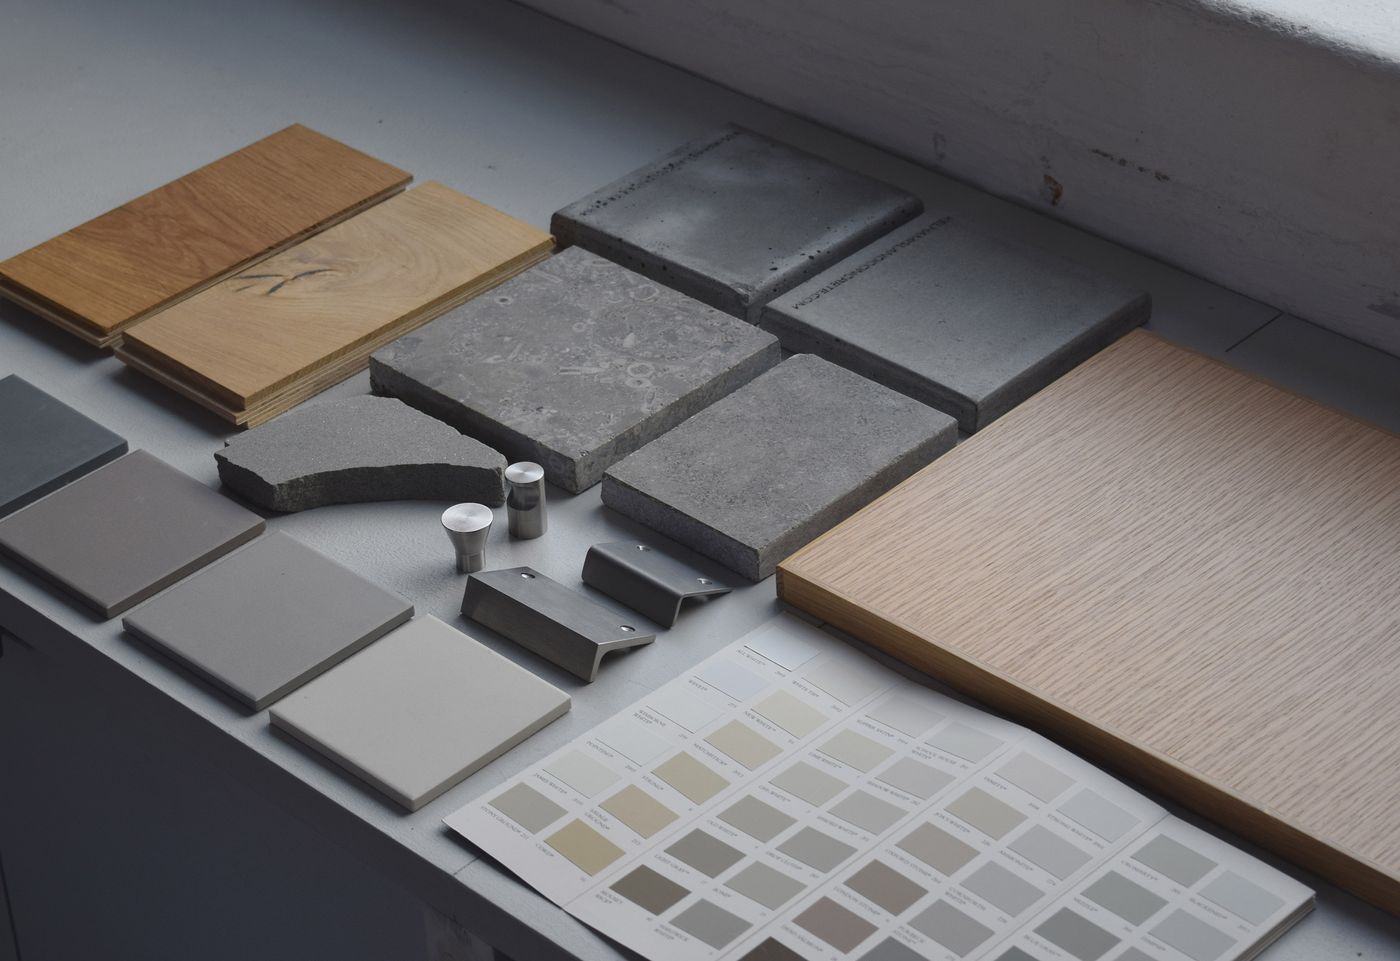 Proposed material palette for the Castleton Road project designed by From Works.